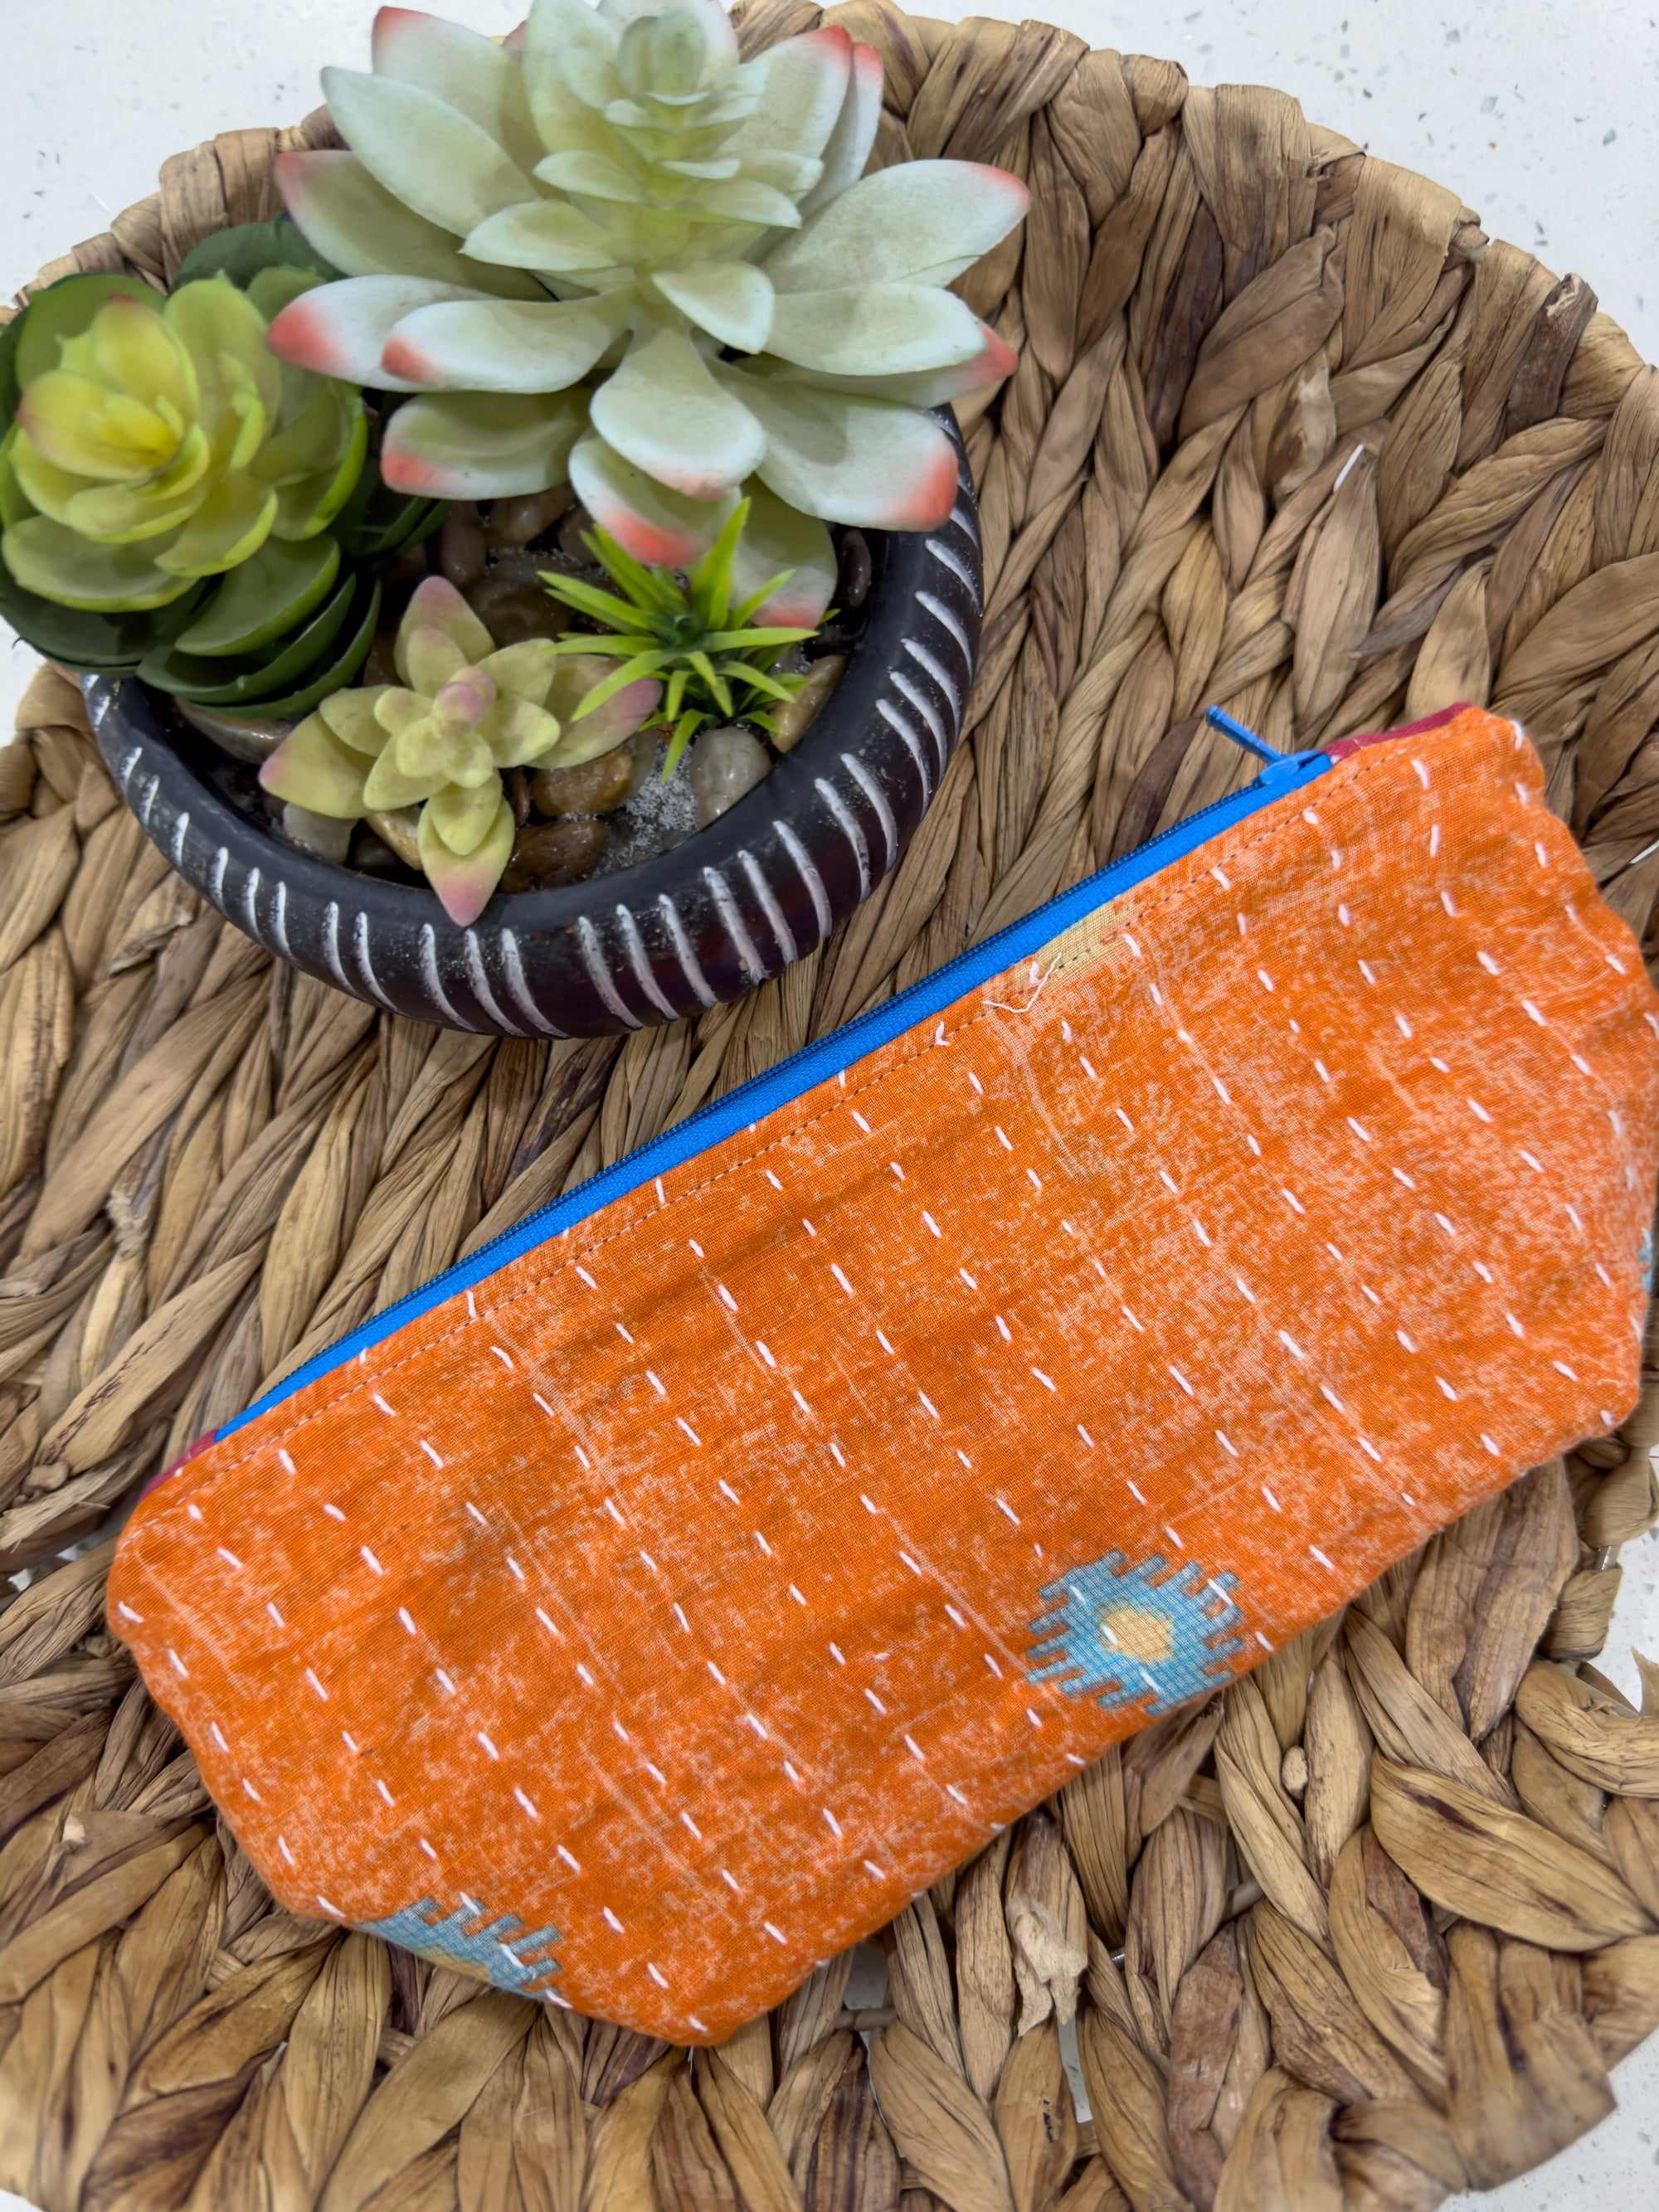 an orange purse sitting on top of a woven basket next to a succulent